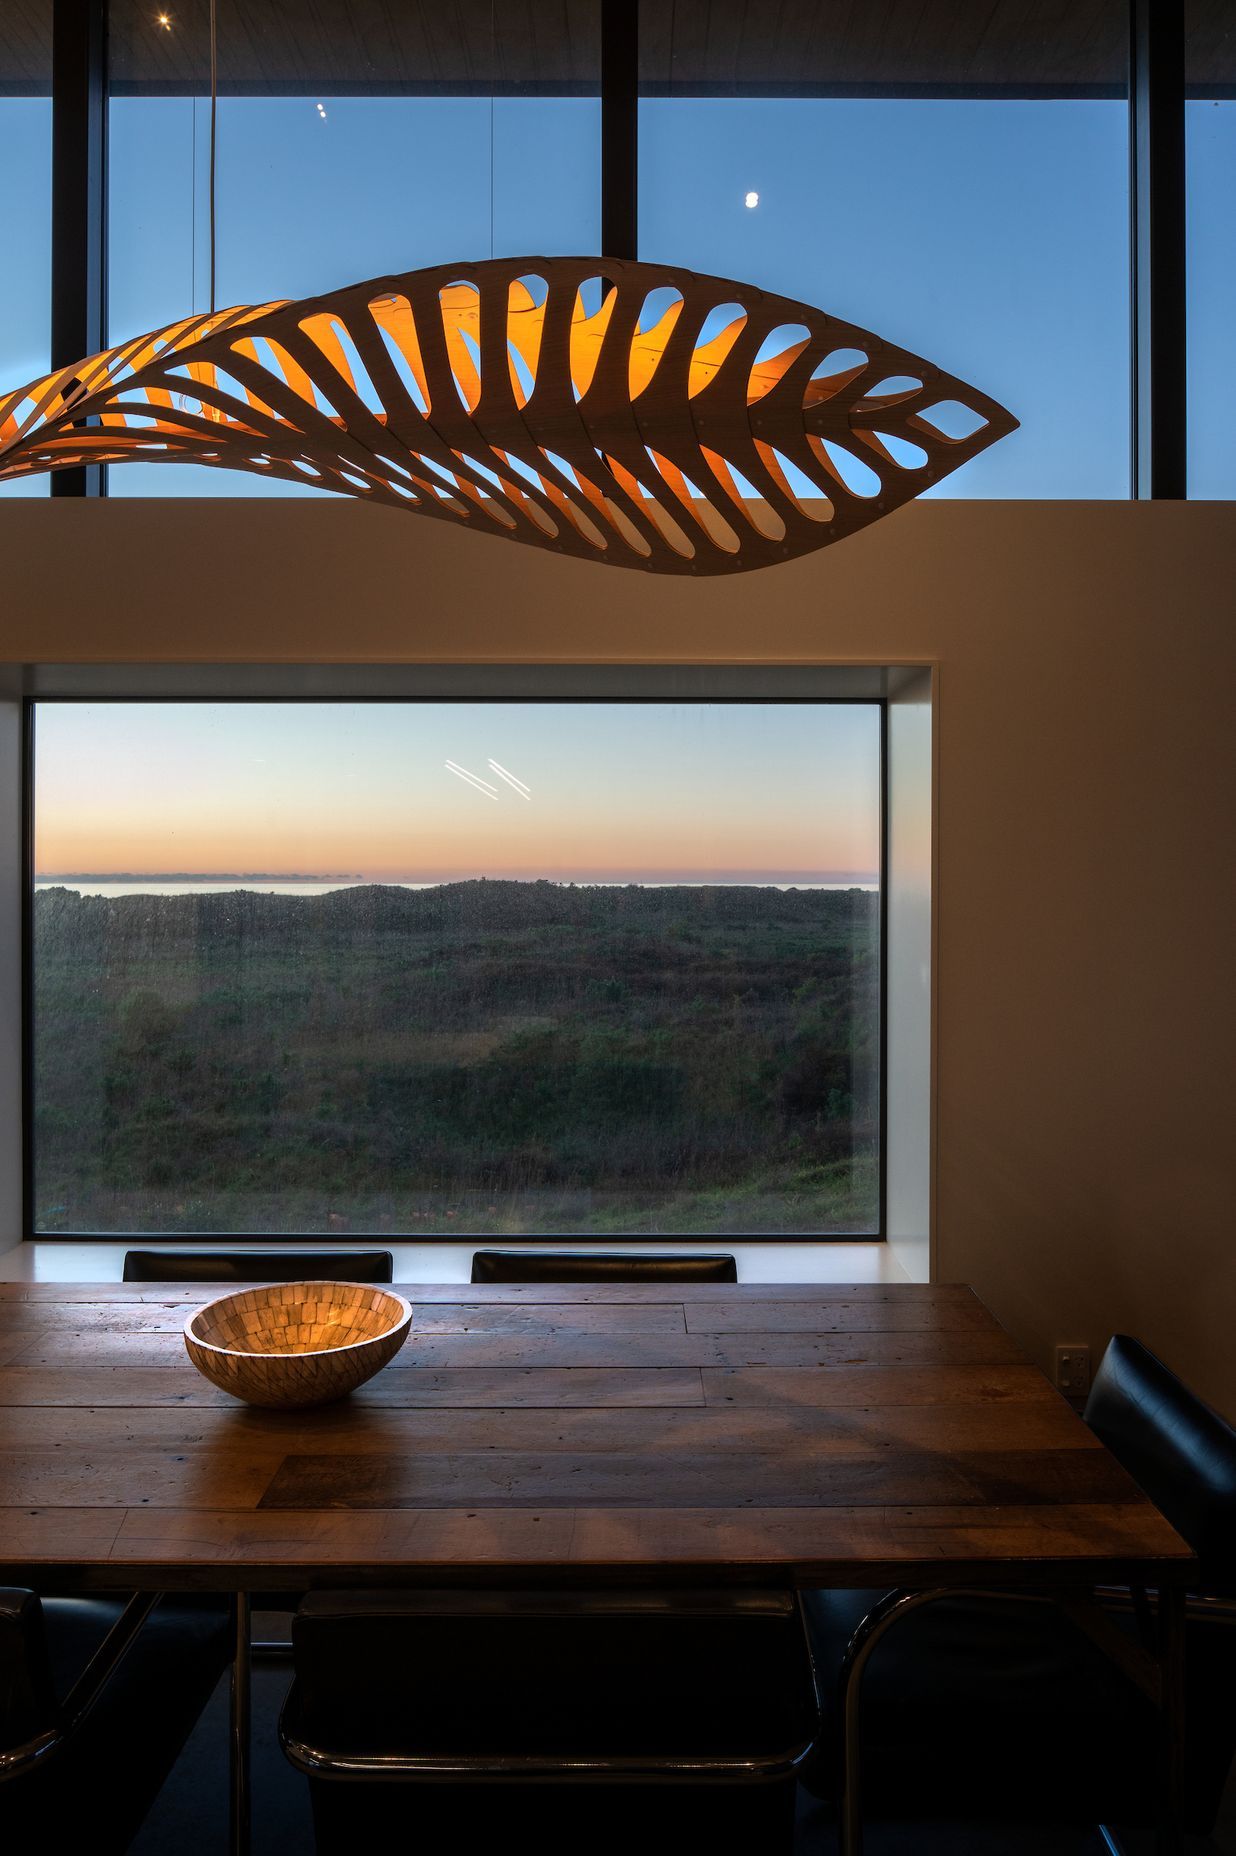 Vignettes of the landscape provide an ever-changing vista, while light and shadow from the feature pendant plays across the interior surface.